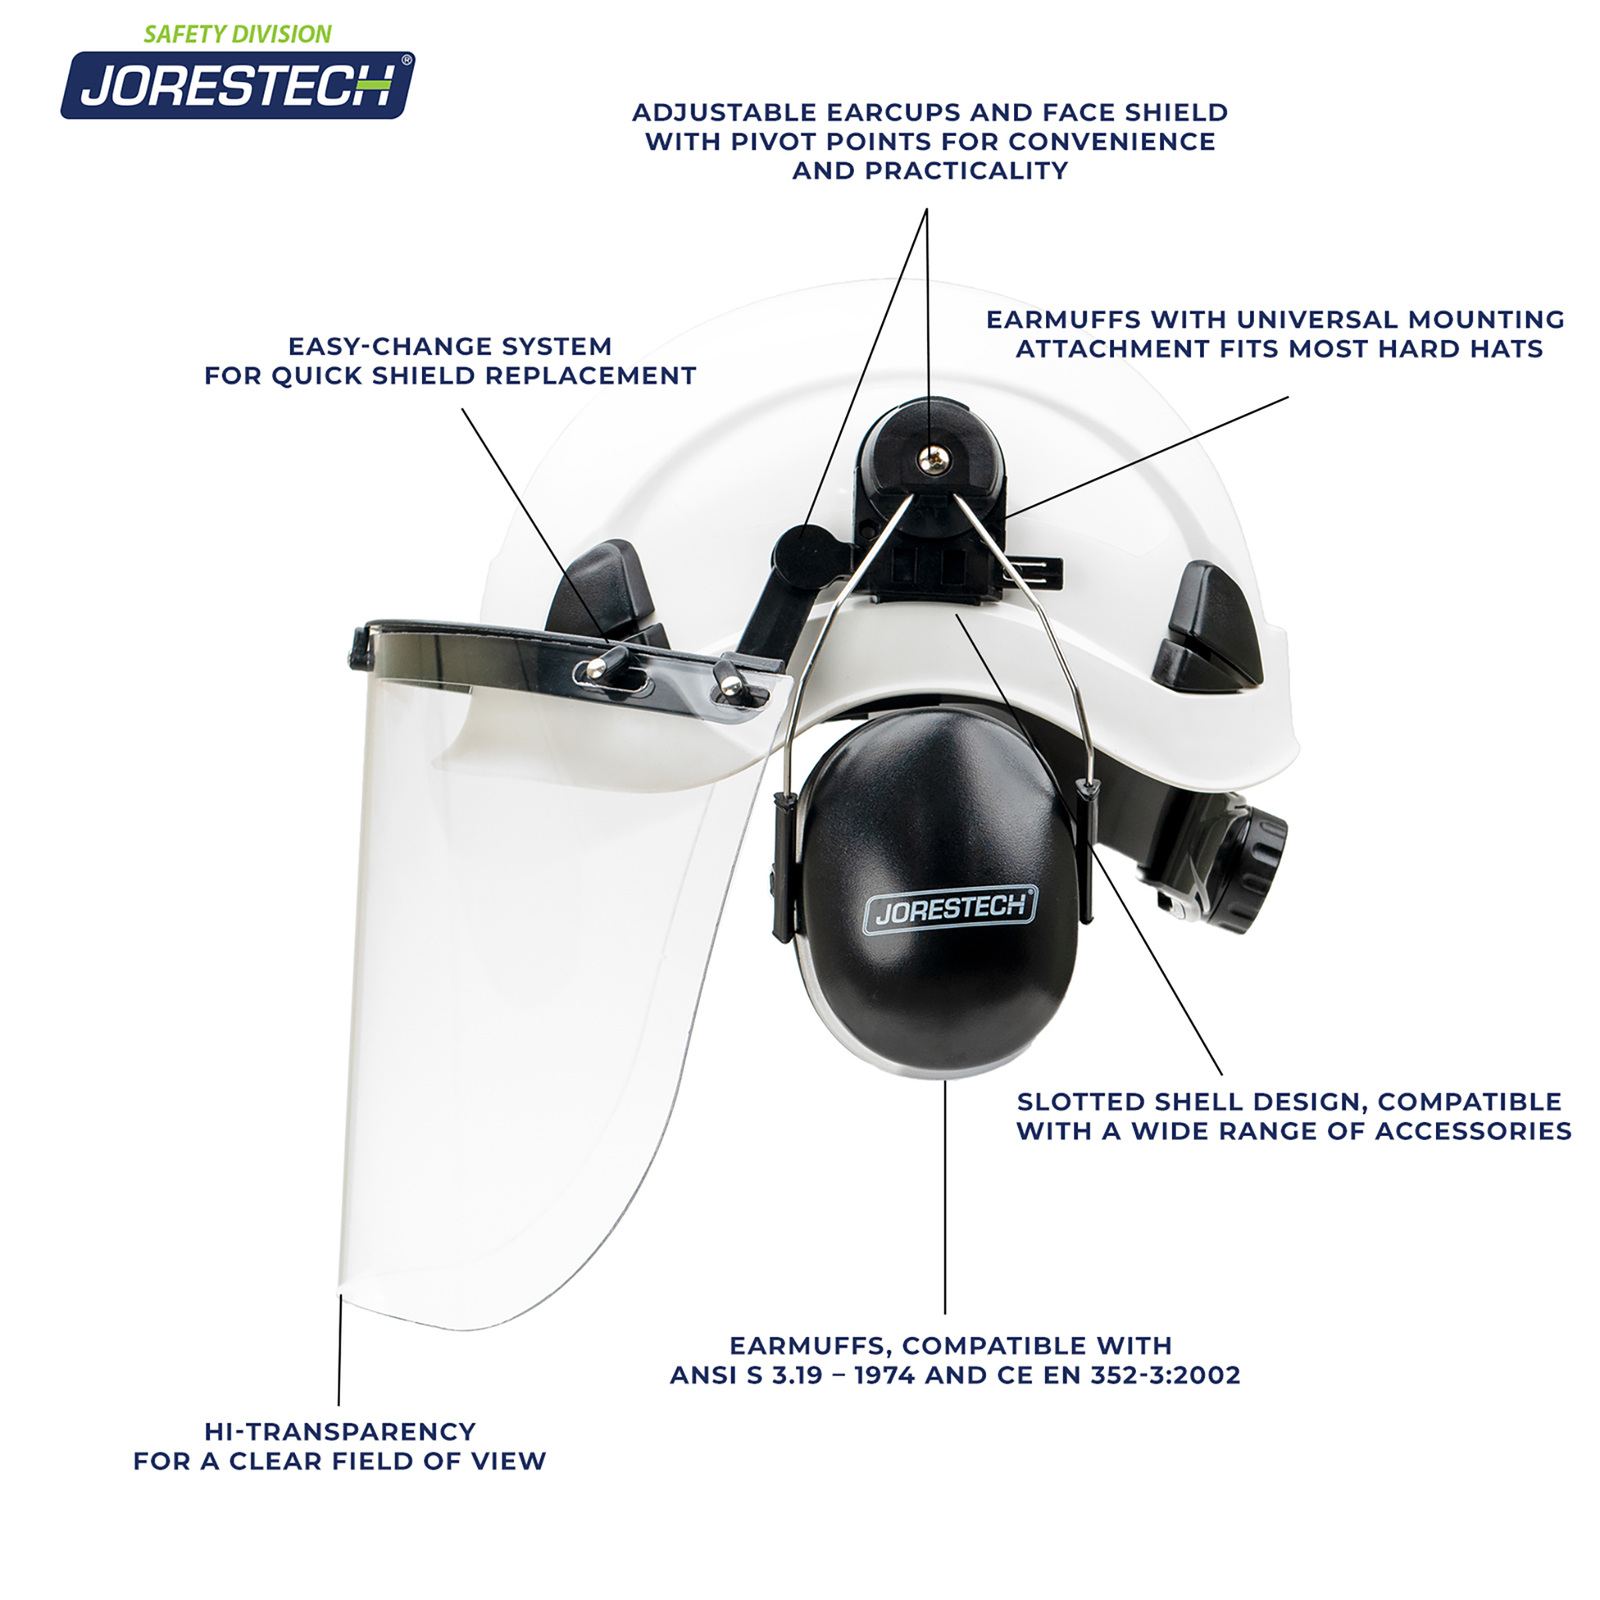 Features of the Safety hard hat system with face shield and earmuffs